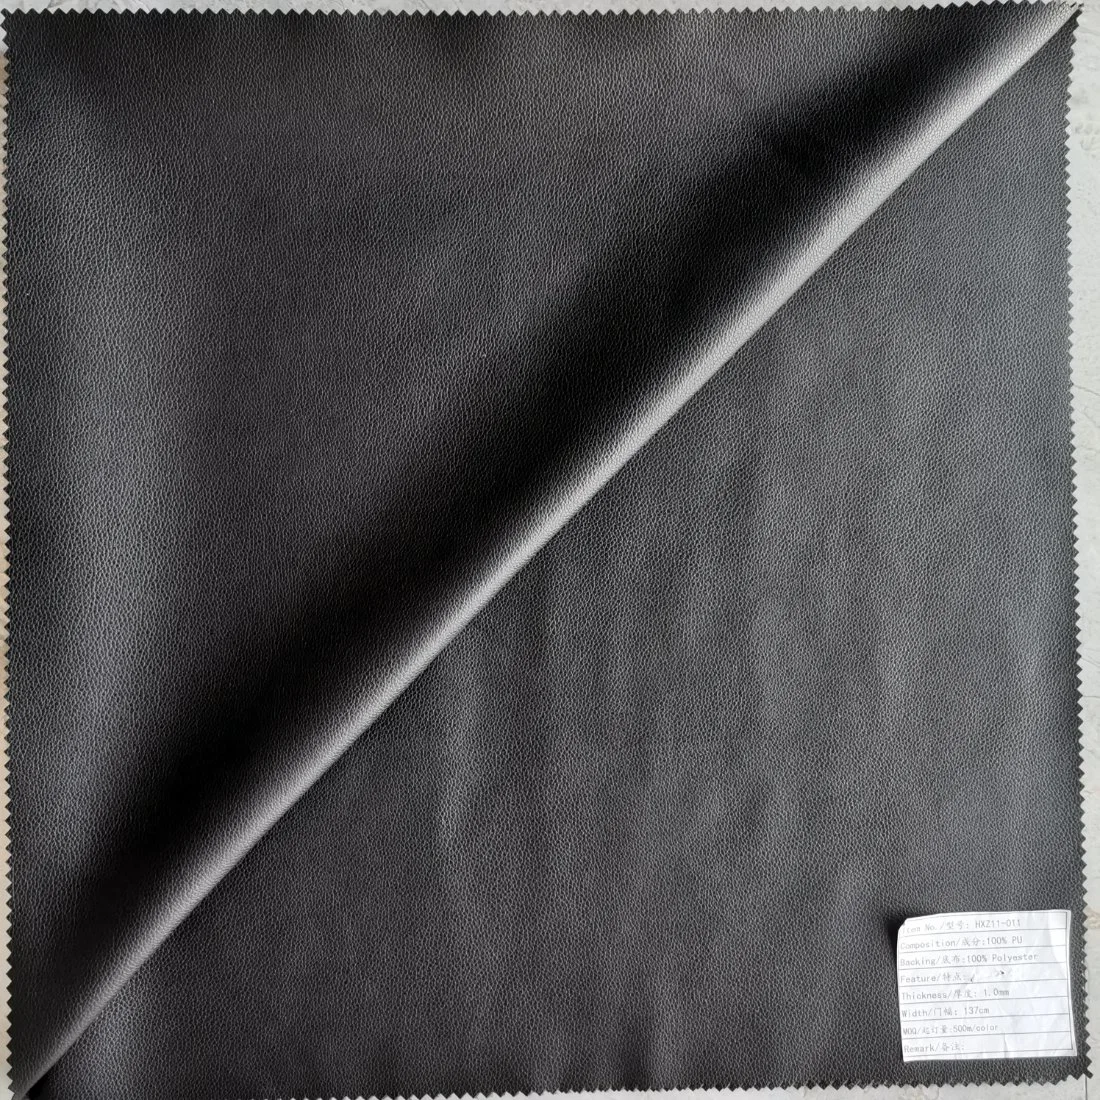 Imitation Cotton Backing Synthetic PU Leather with Soft Hand-Feel and Litchi Pattern Look